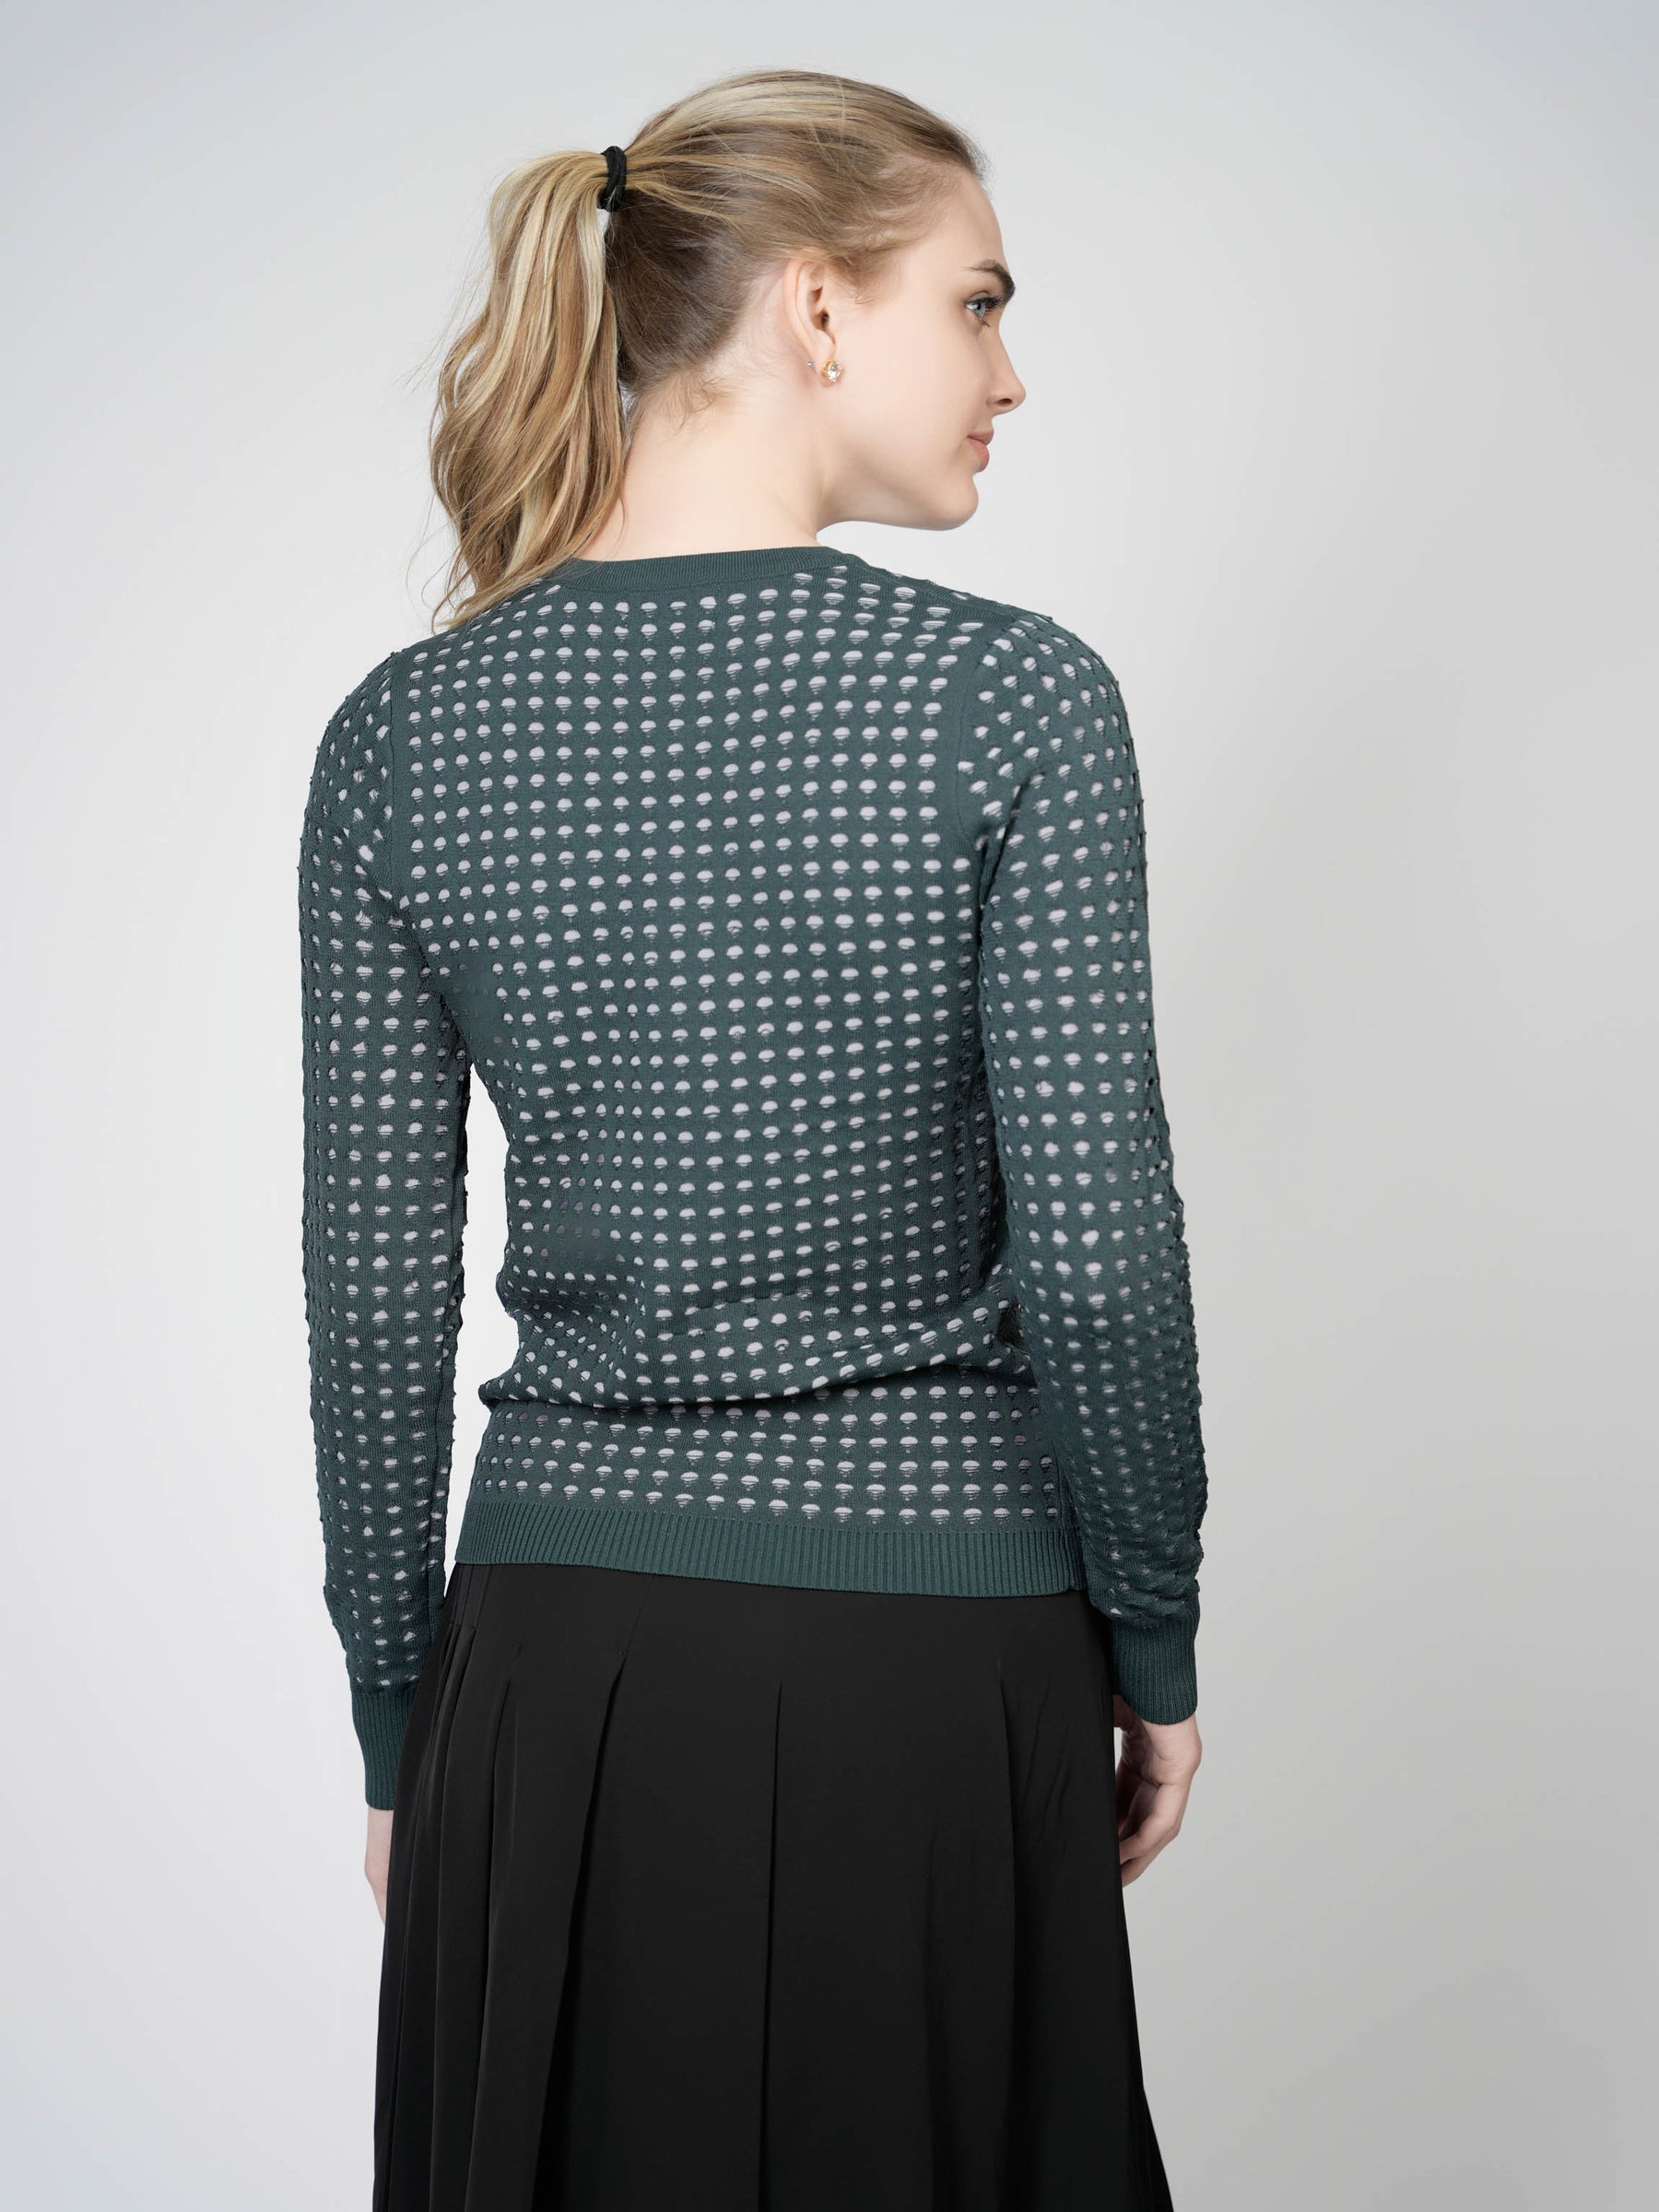 KNIT LINED SWEATER-GREEN/GREY